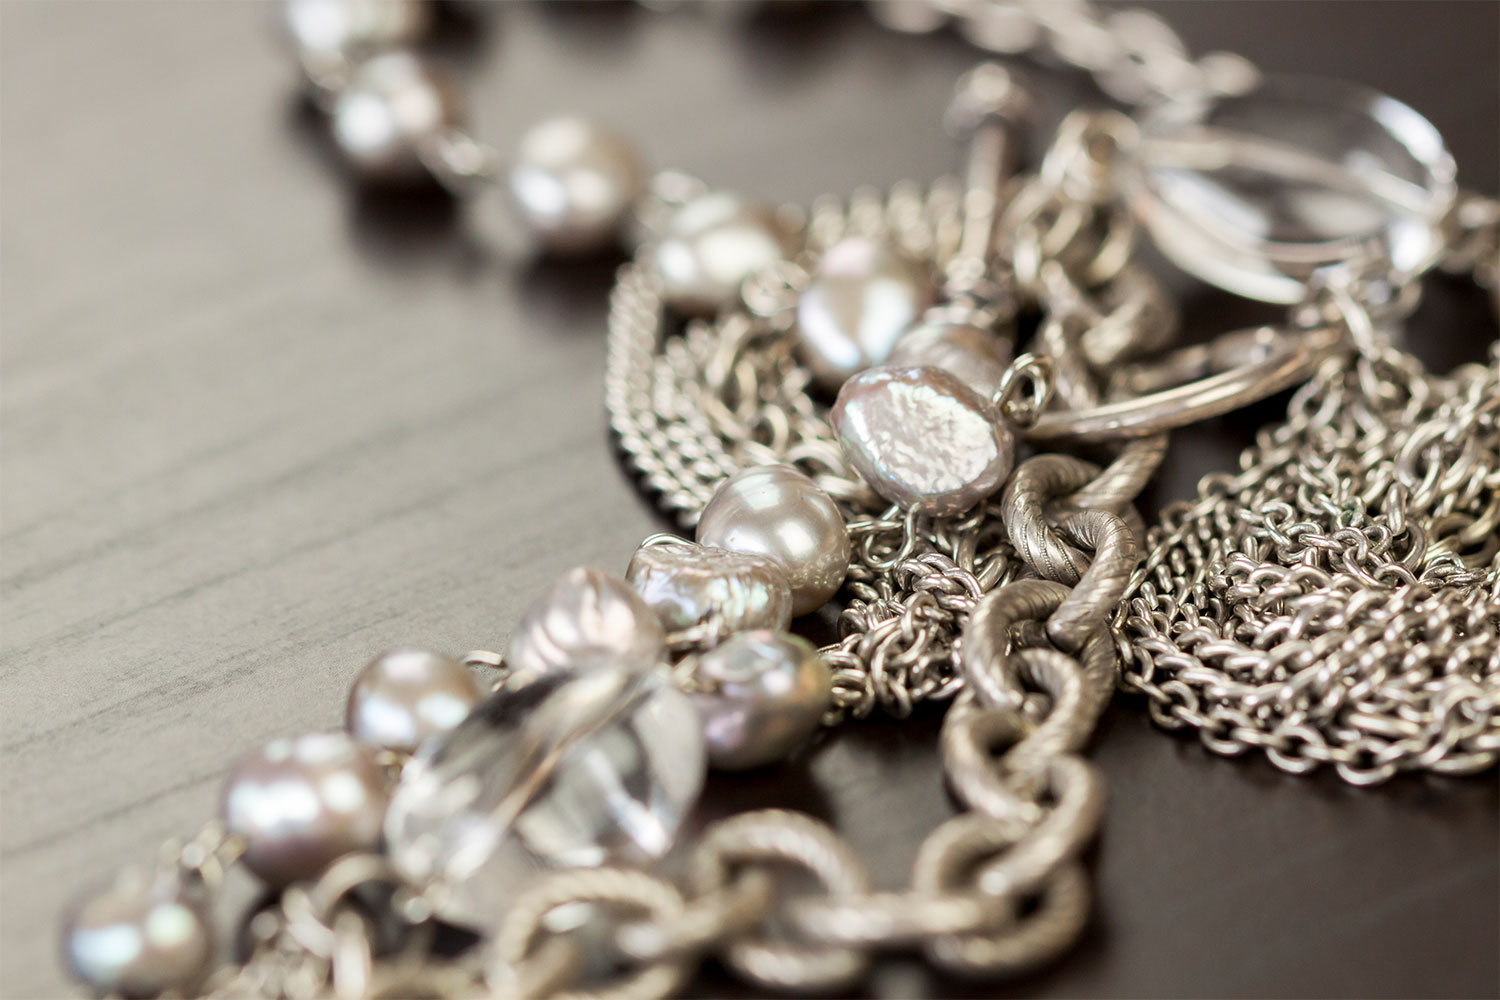 How To Store Jewelry To Prevent Tarnish